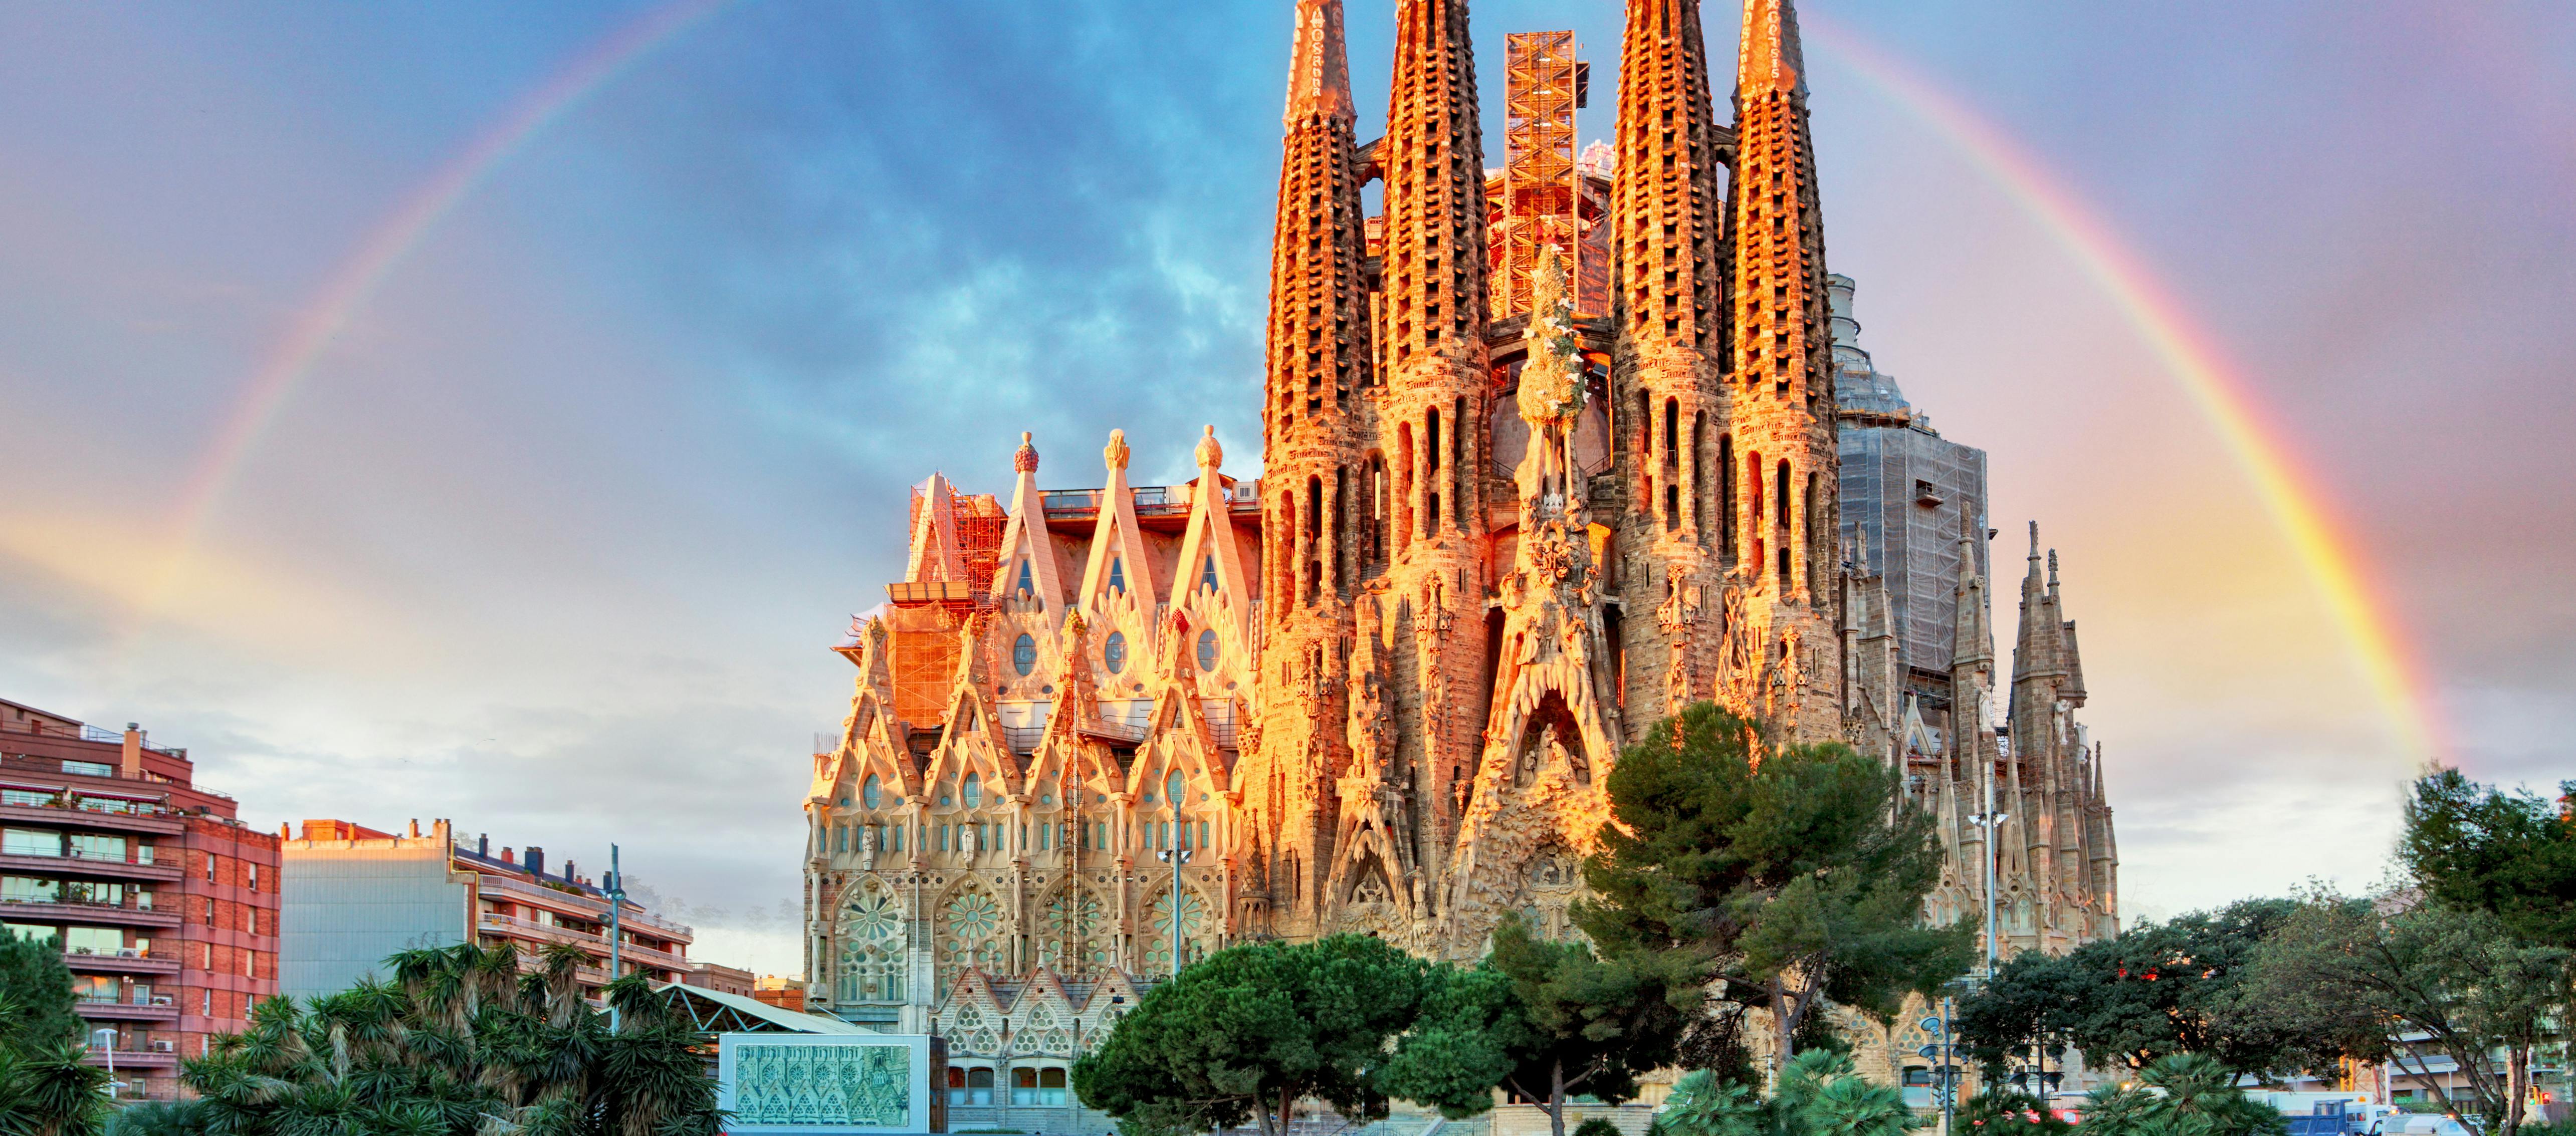 Best of Barcelona full-day tour with skip-the-line at Sagrada Familia